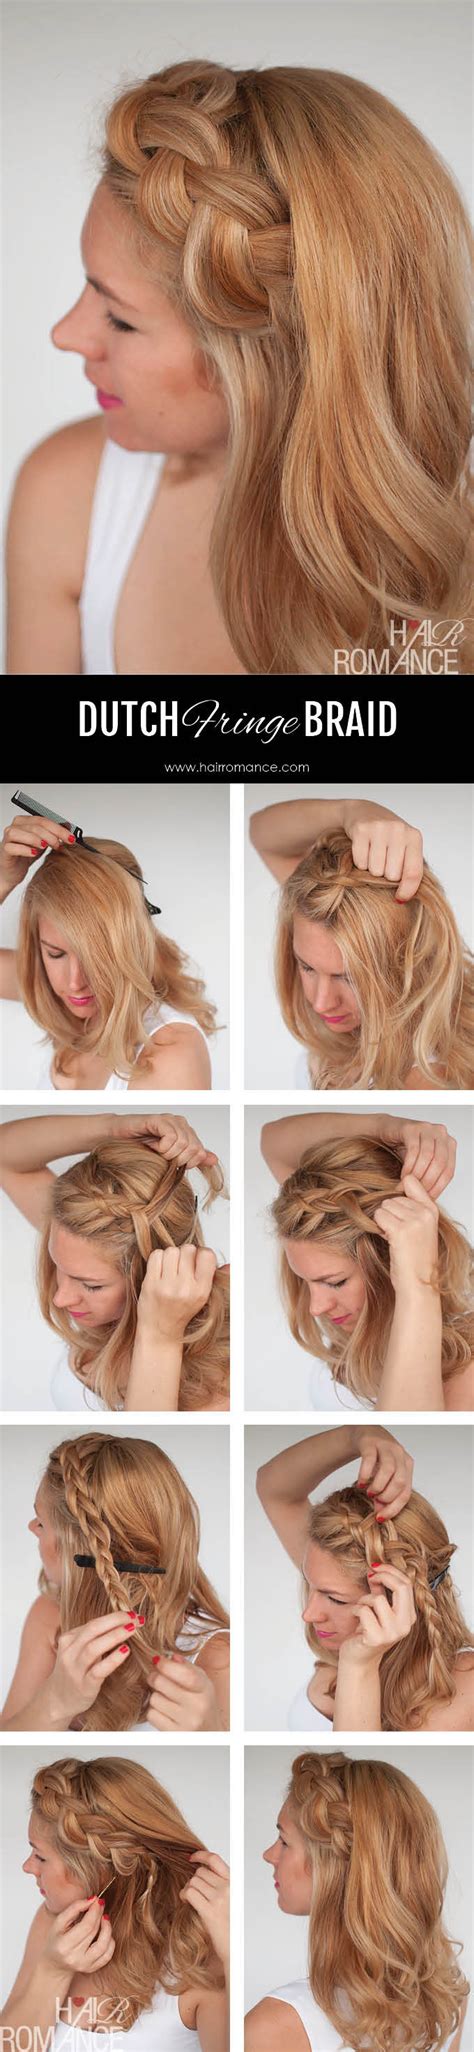 42 Best Pictures Step By Step Instructions On How To Braid Hair Top